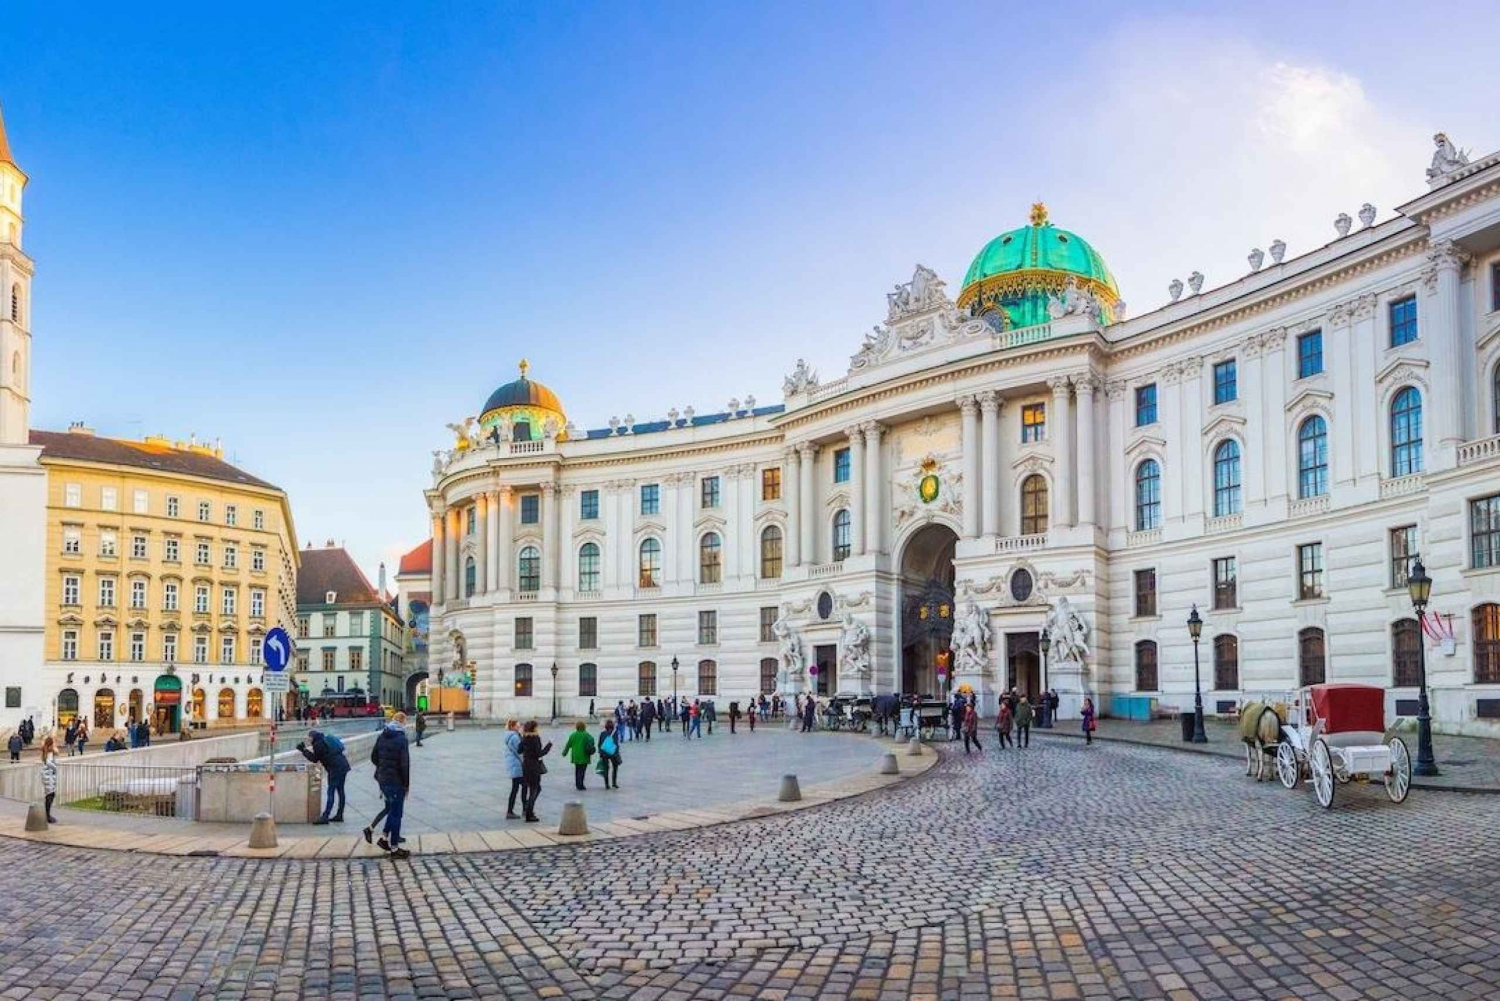 The 10 Tastings of Vienna Private Tour